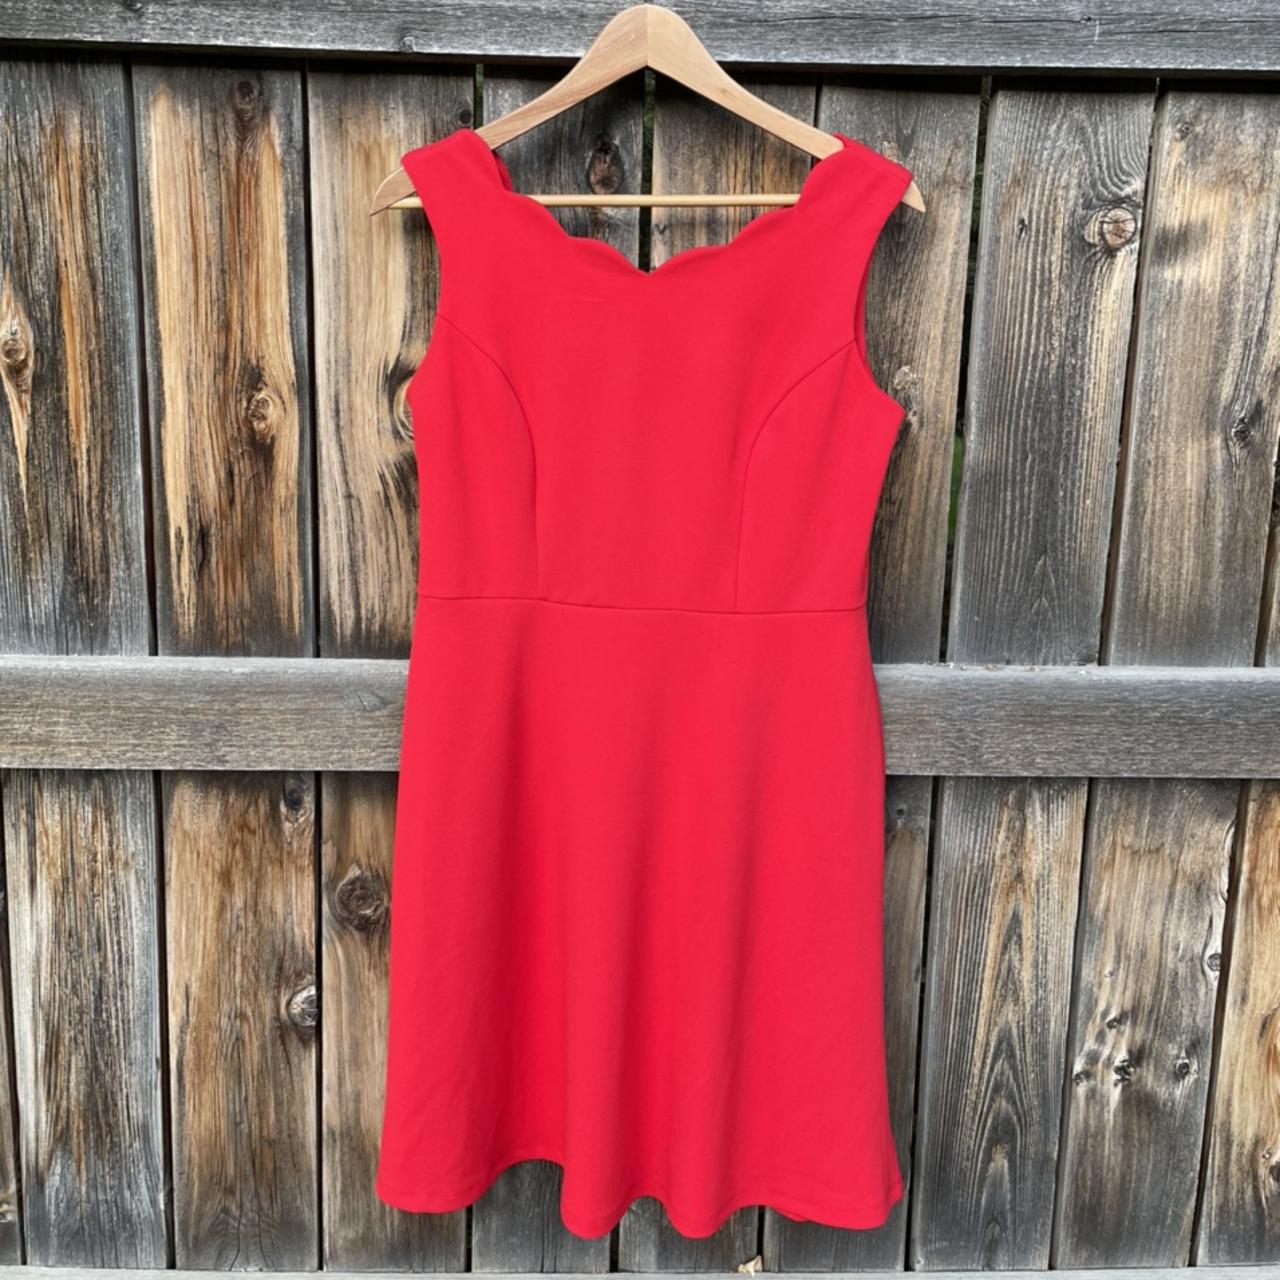 Product Image 1 - Cute red sleeveless cocktail/evening dress.